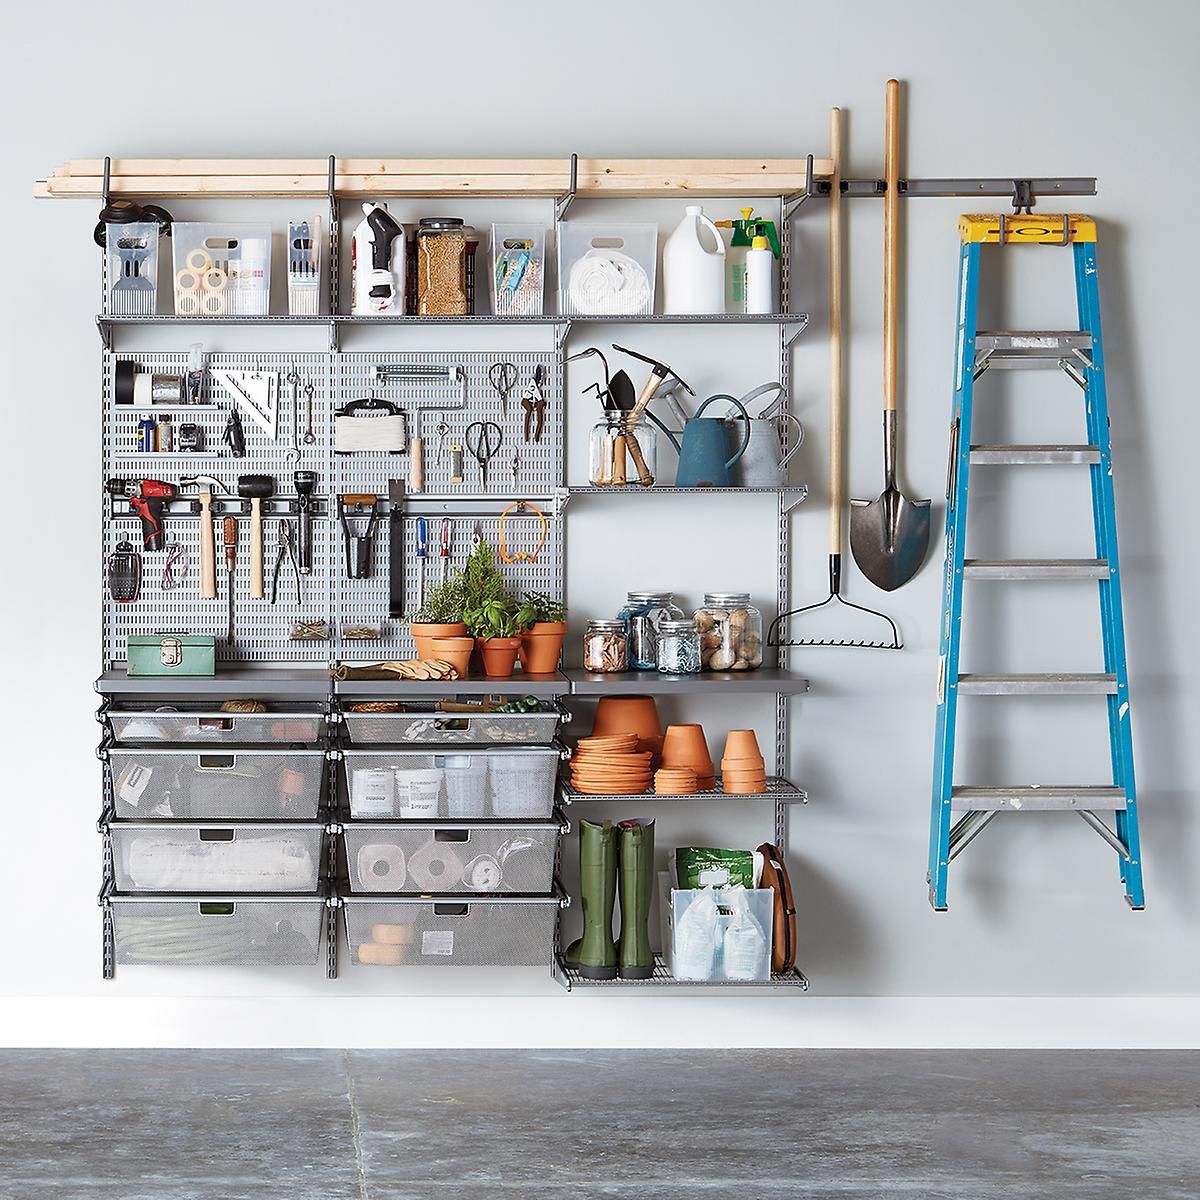 The Go-to-Guide To Clean and Organize Your Garage Once and For All